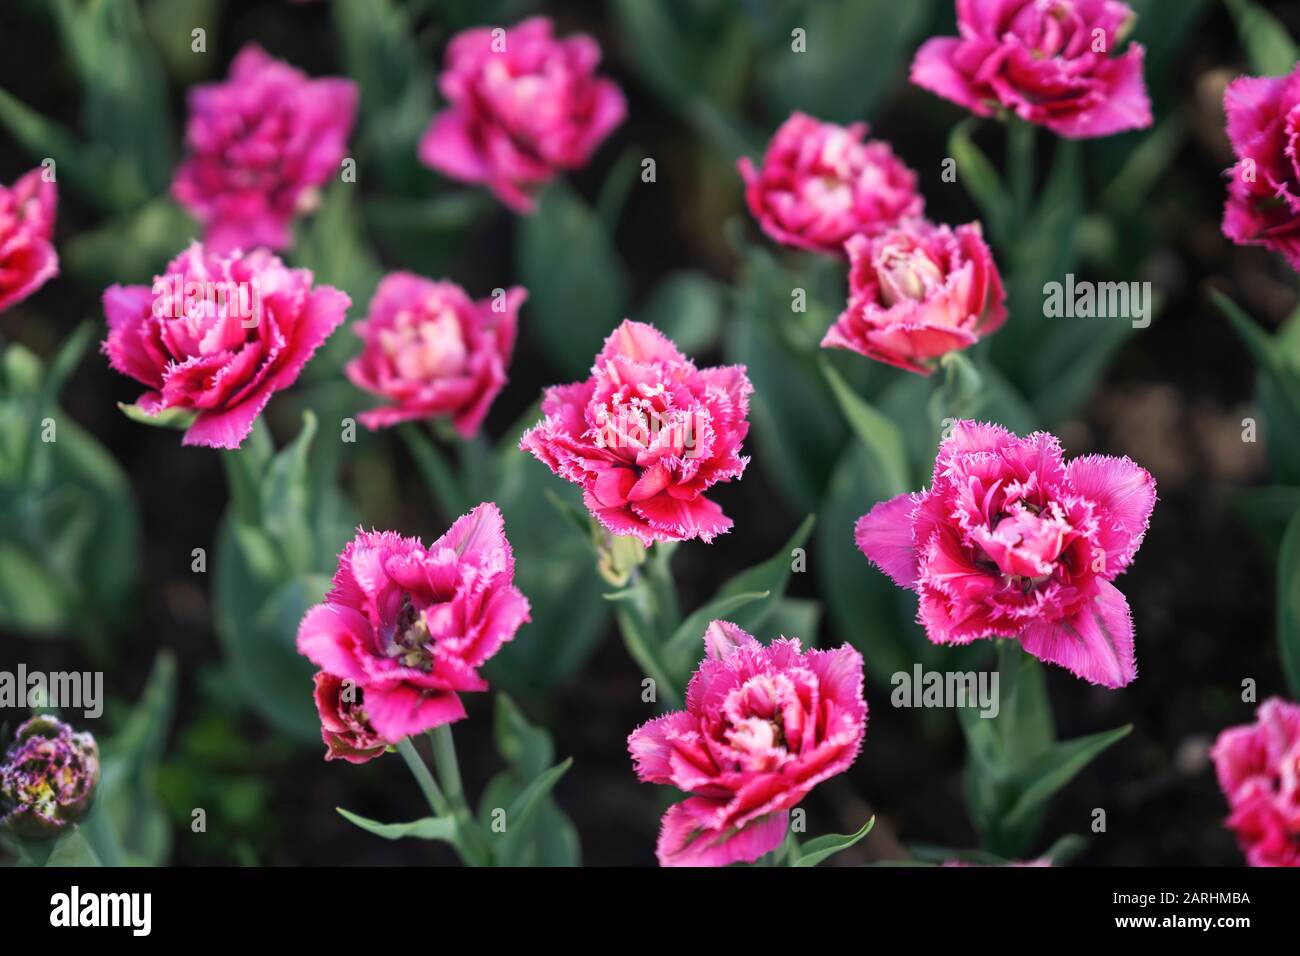 Pink double-flowering tulips, bright flowers blooming in the garden park. Natural spring background Stock Photo